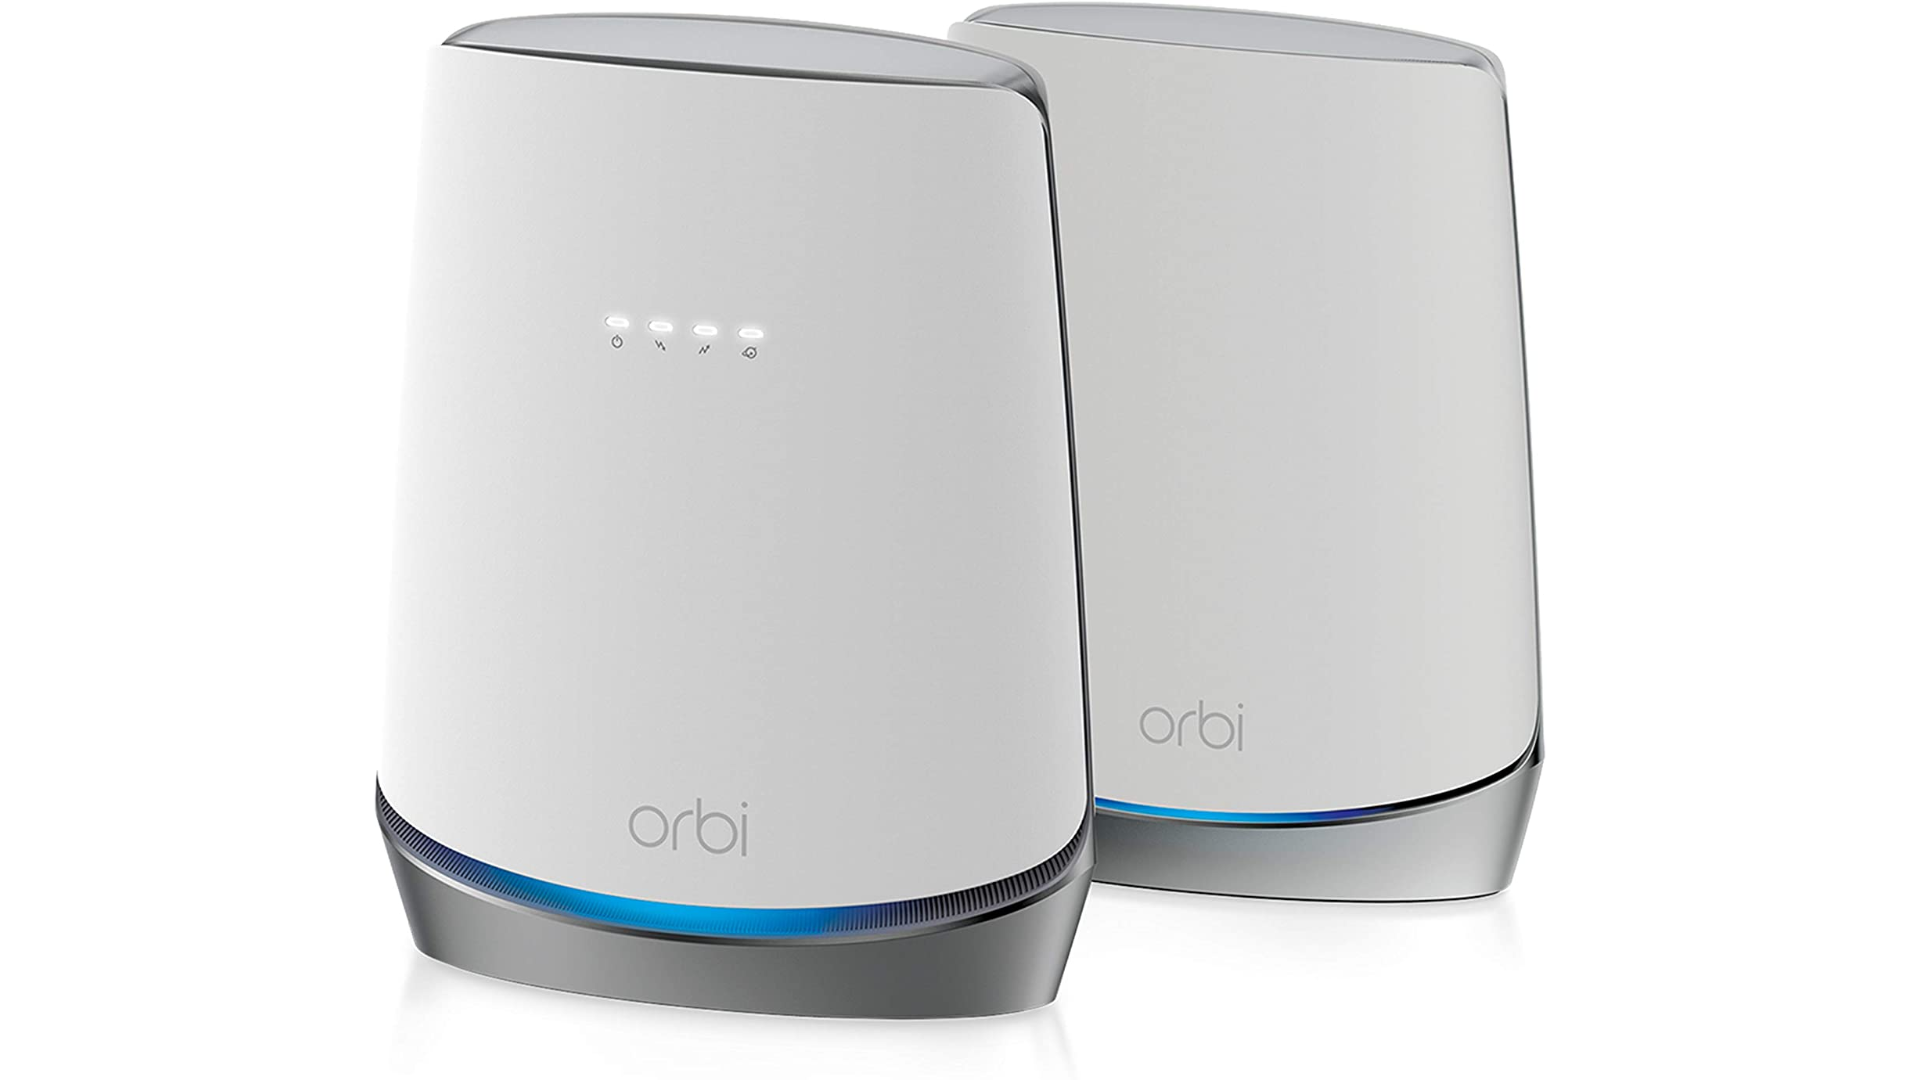 netgear-s-orbi-modem-router-ditches-isp-rental-fees-has-wi-fi-6-at